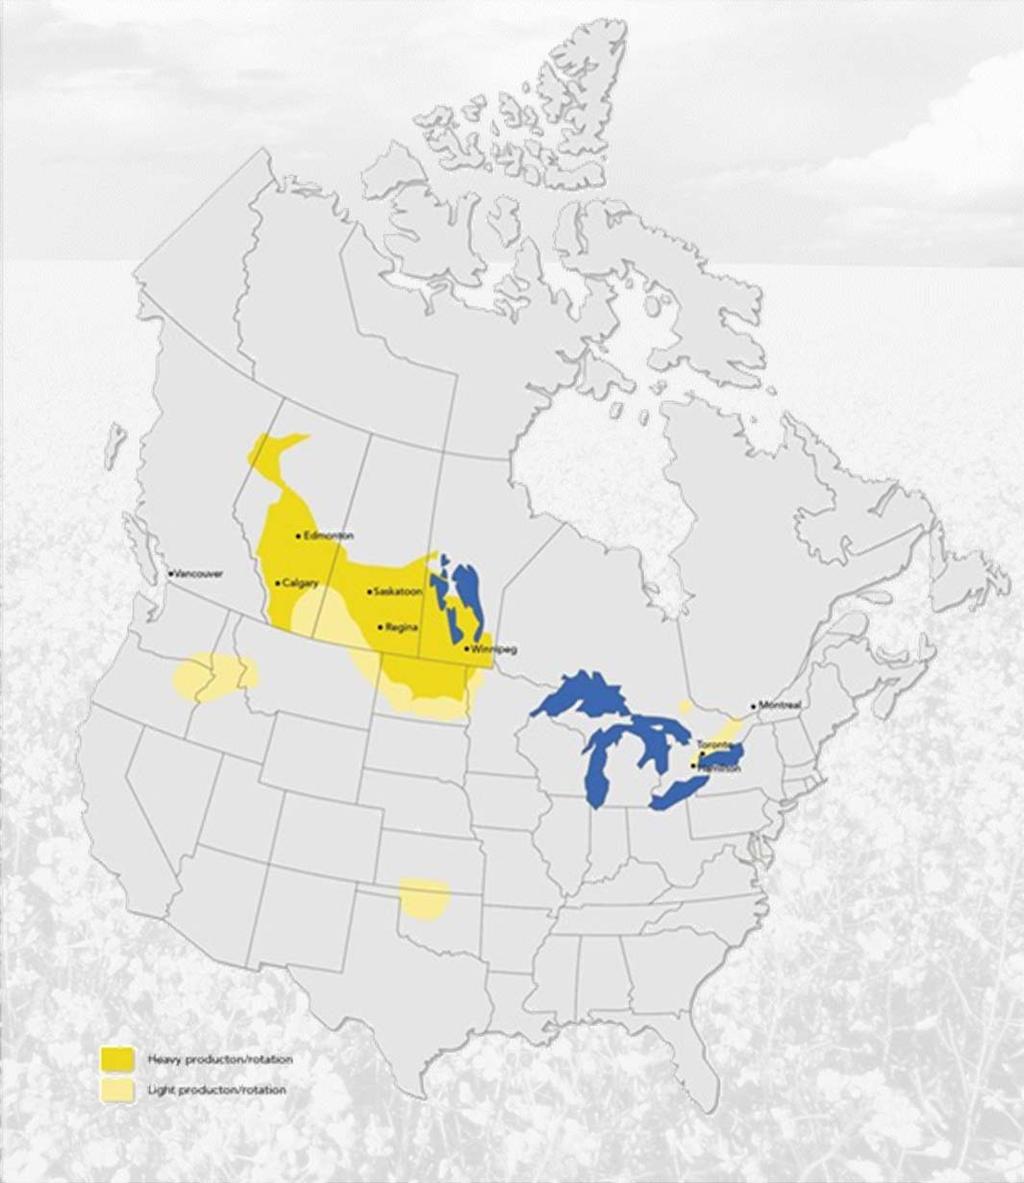 Canada Canola is our dominant oilseed